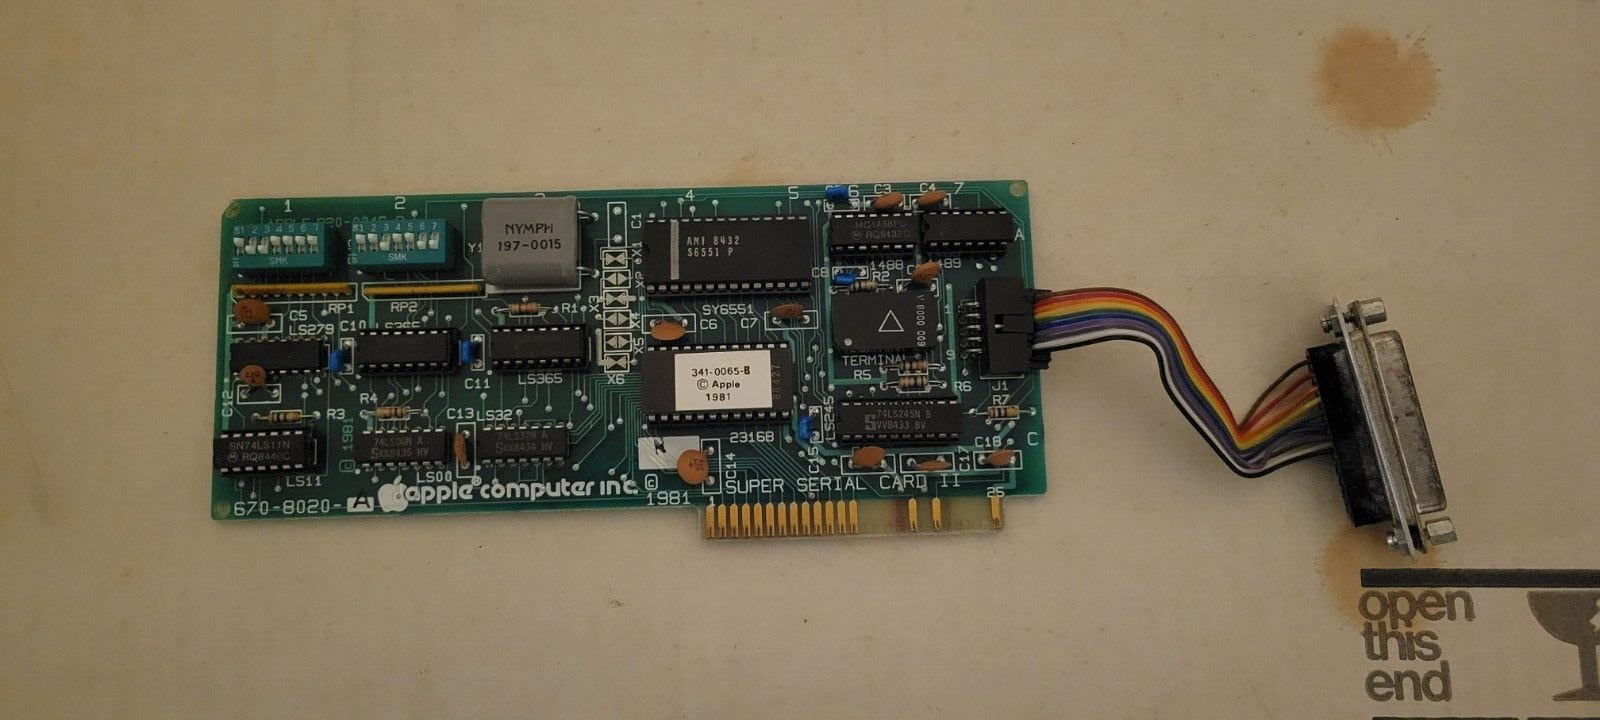 Apple Super Serial Card for Apple II/IIe - Tested Working